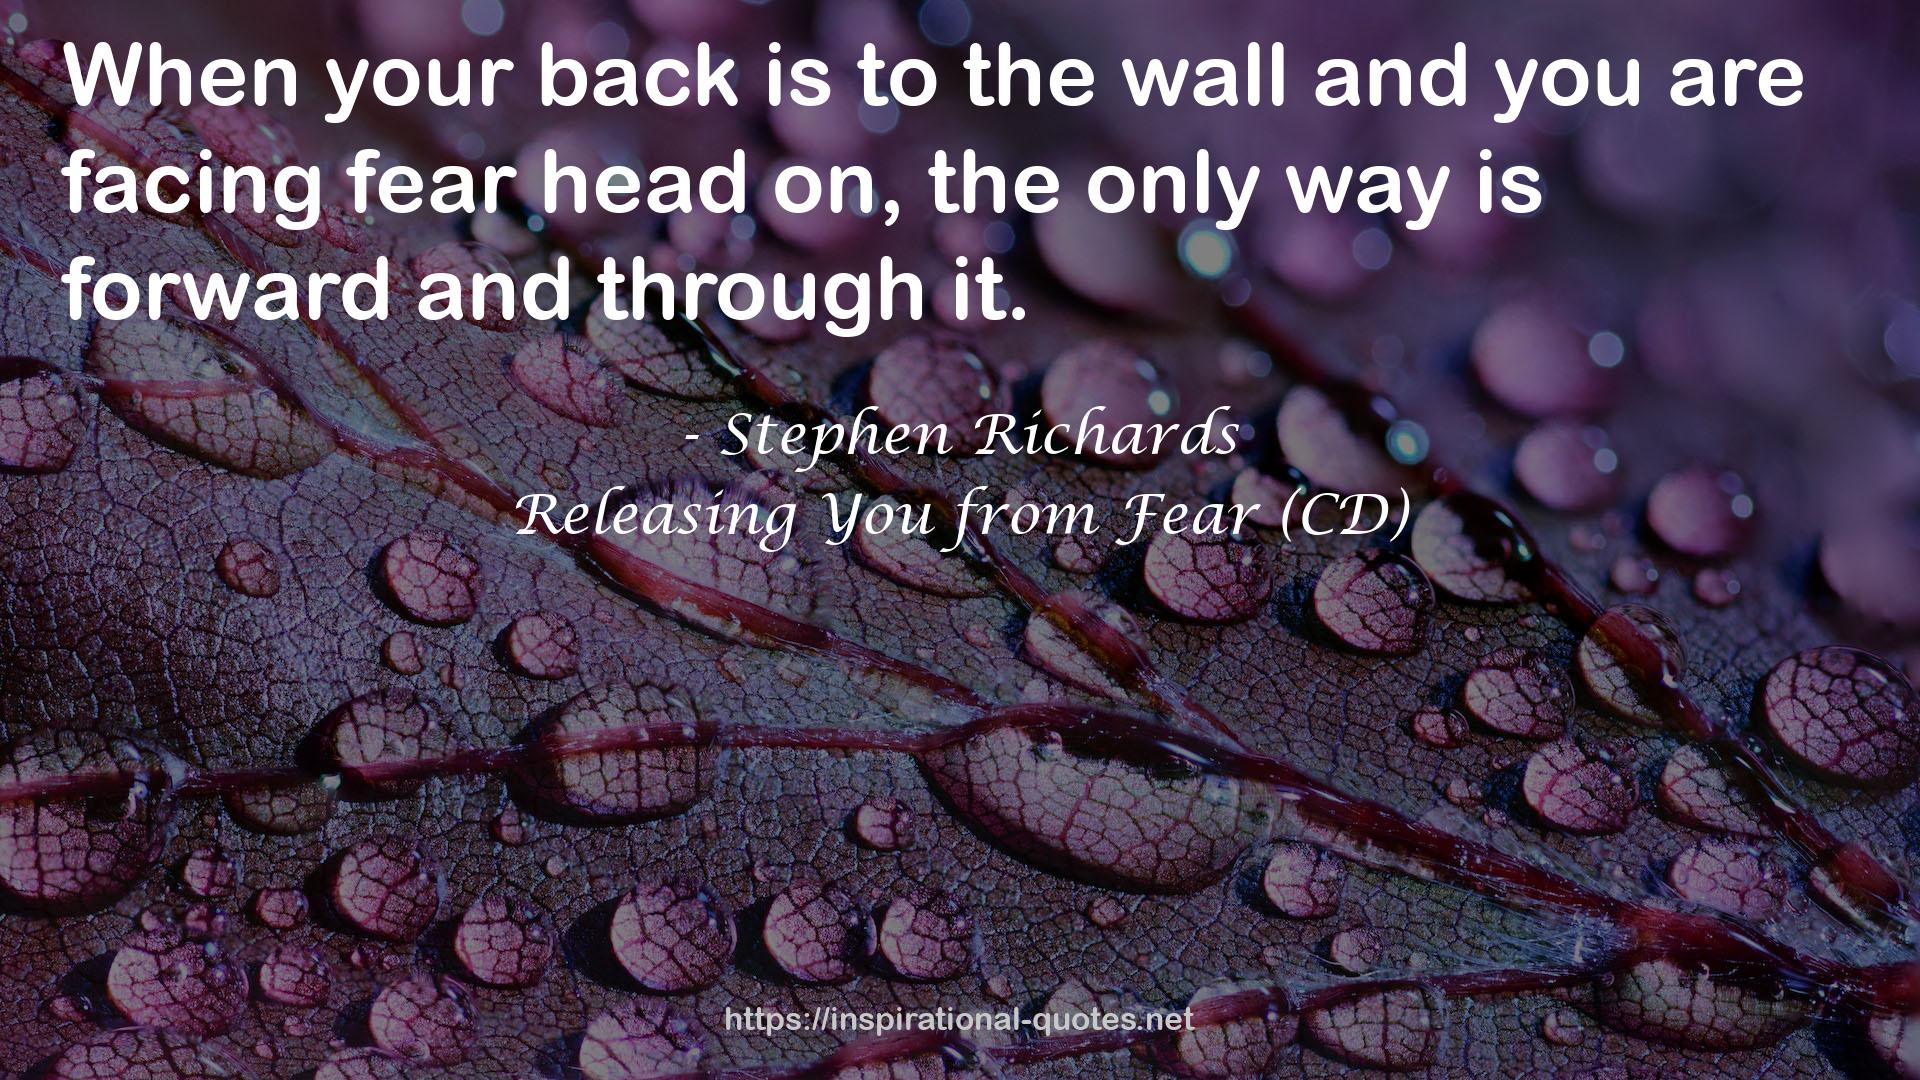 Releasing You from Fear (CD) QUOTES